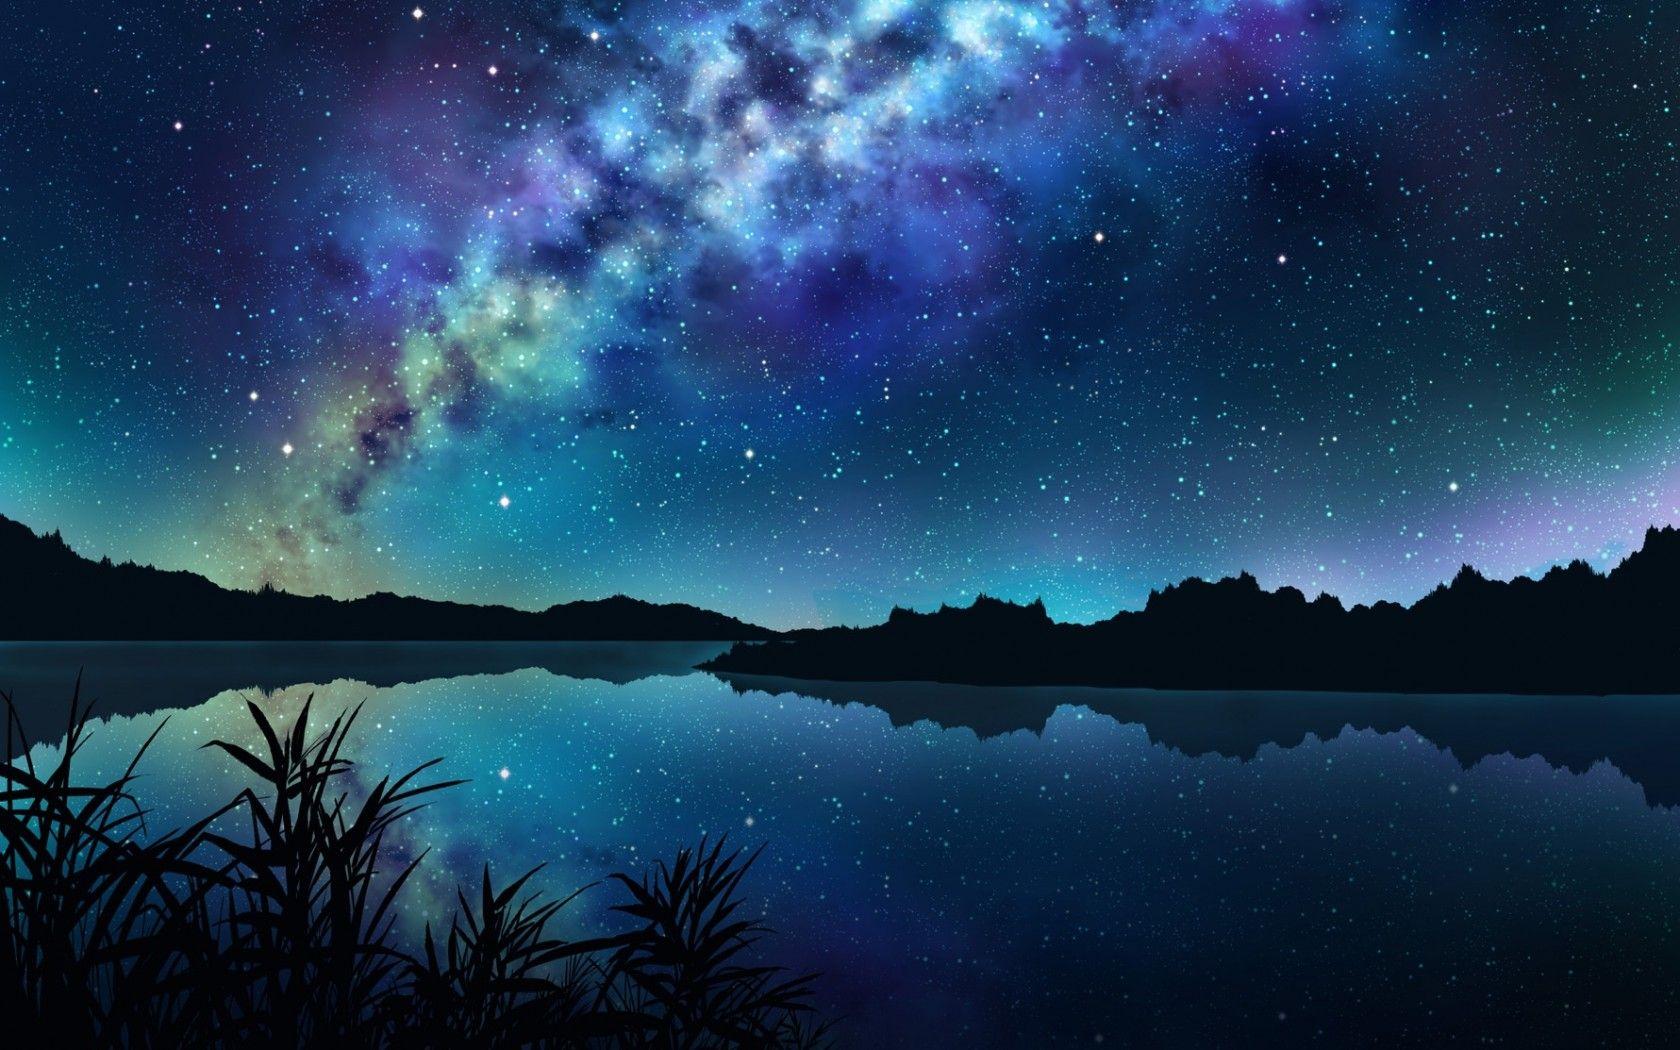 Download 1680x1050 Anime Landscape, River, Night, Stars, Reflection